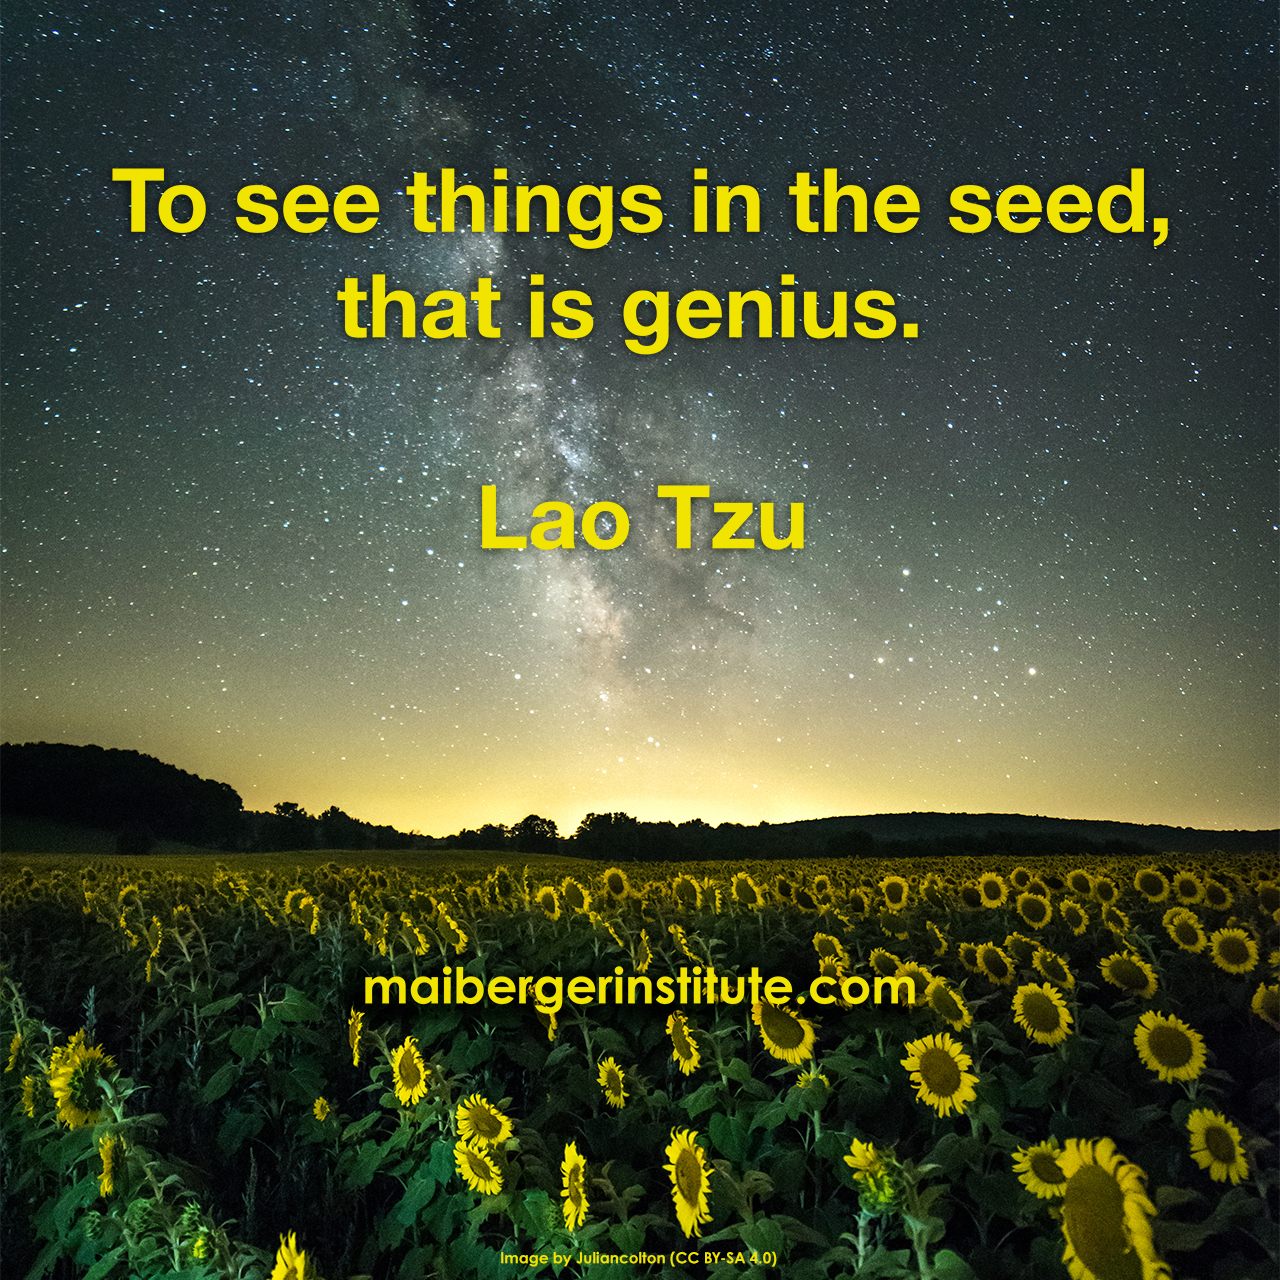 "To see things in the seed, that is genius" ~ Lao Tzu